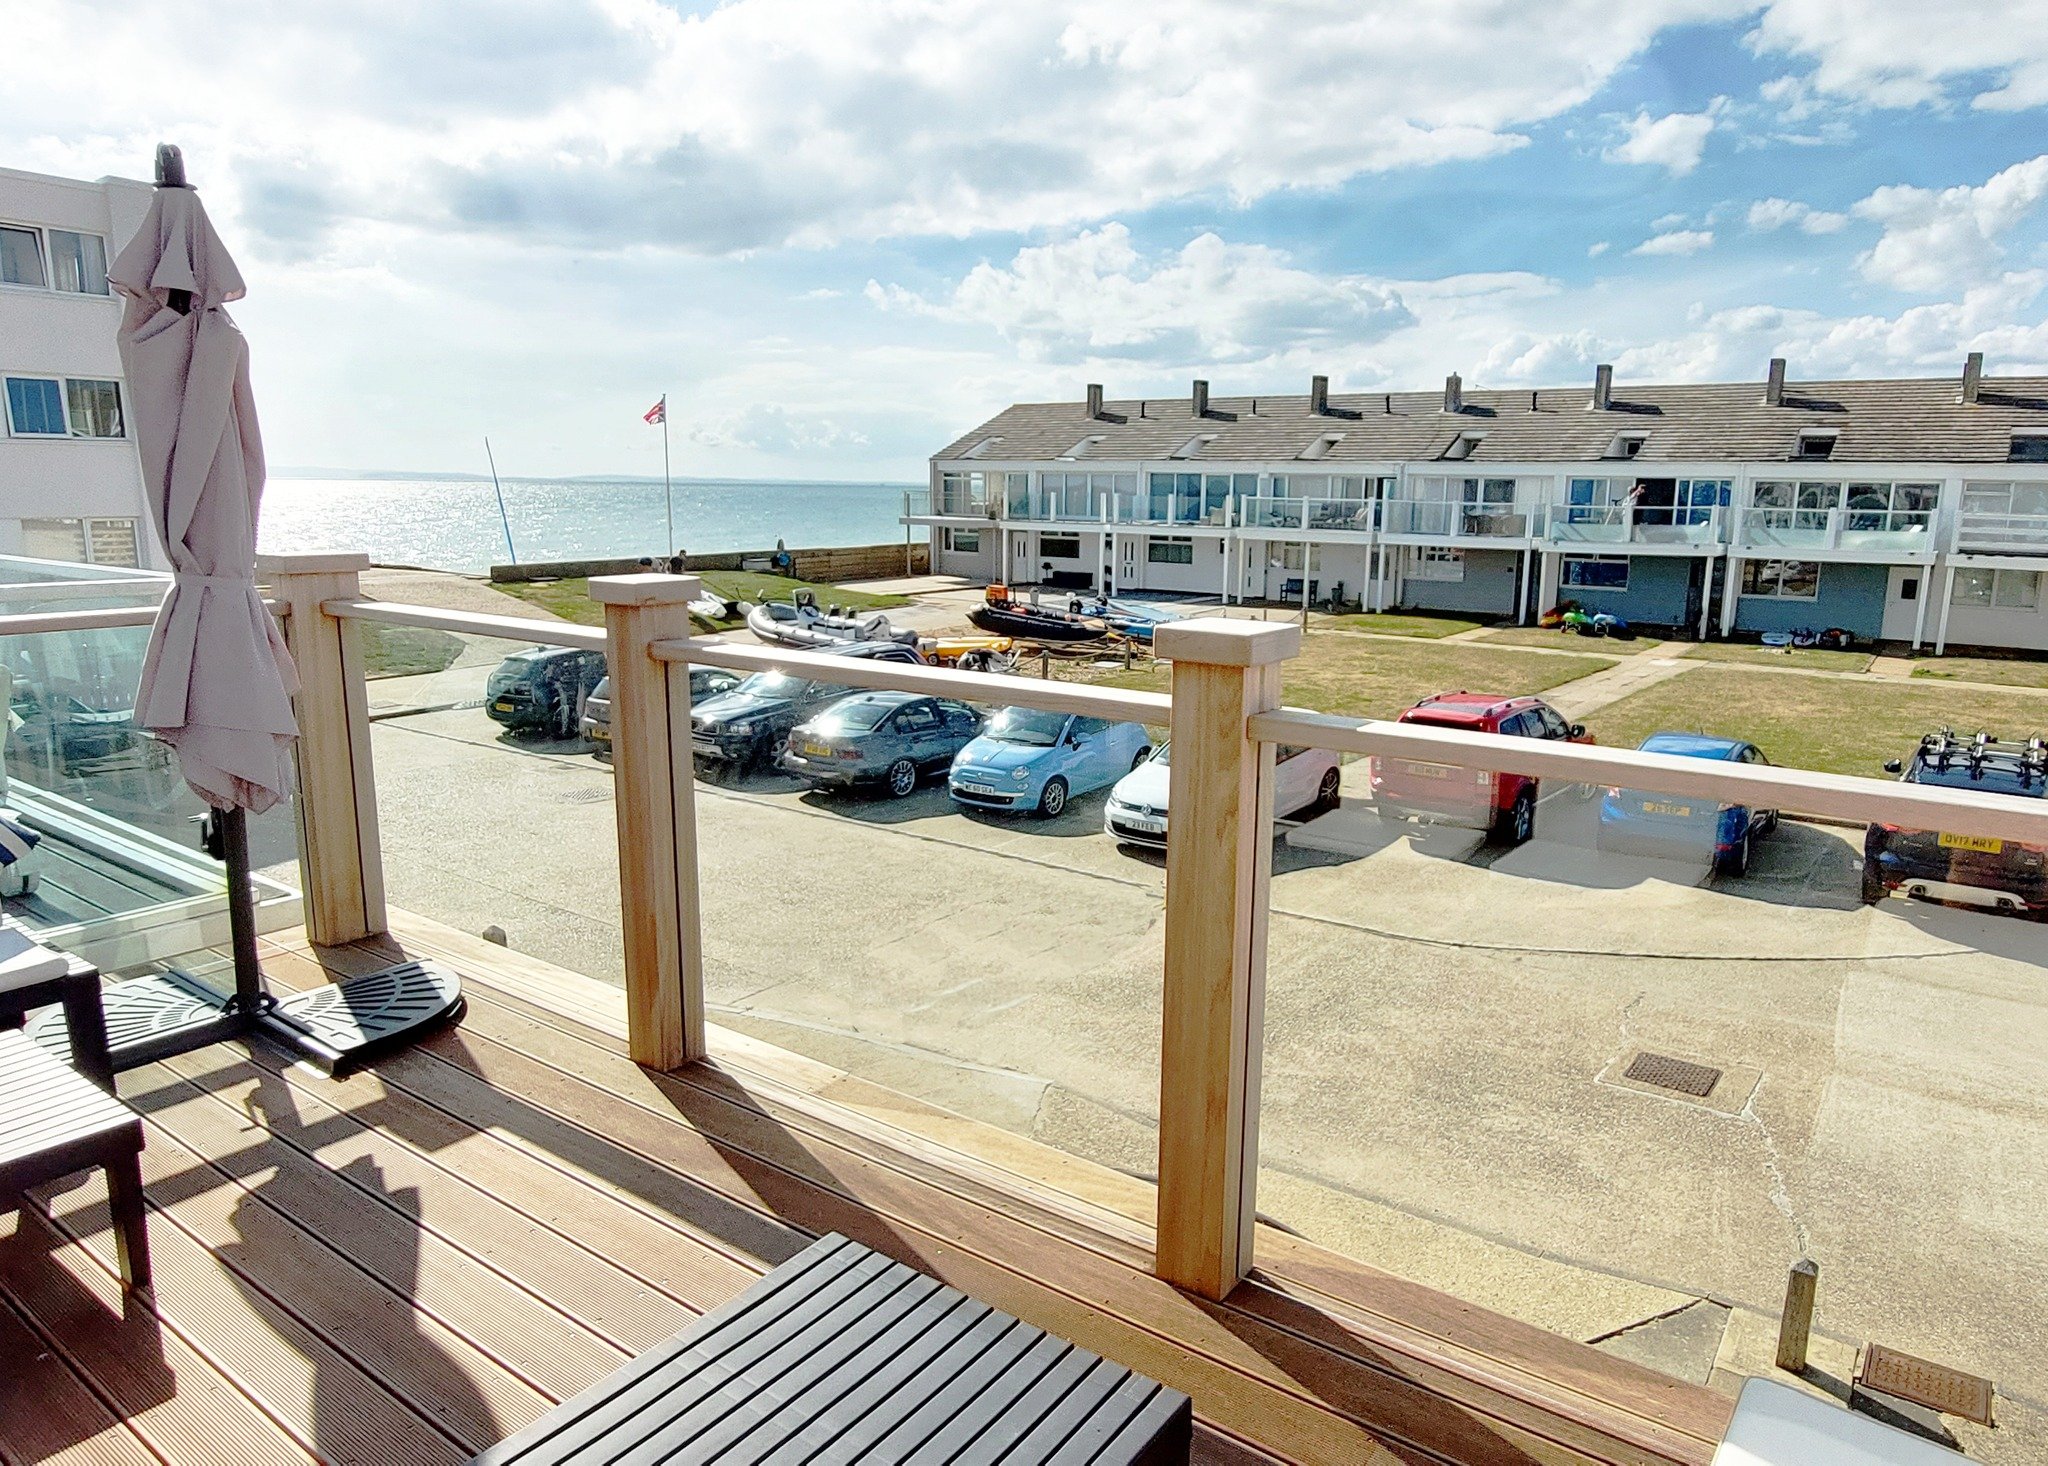 Bit of balcony prep while the sun is out!
.
🏠 Beach Haven
3 bed, sleeps 6 (2 king, 1 twin)
Seconds from beach⛱
Sea view balcony 🌊
Dog friendly 🐕

 #balconyview🌅 #balconyview😍 #balconyview🌴 #balconyviews😍 #balconyview🐋🐟🐠⛵ #brackleshambaysurf